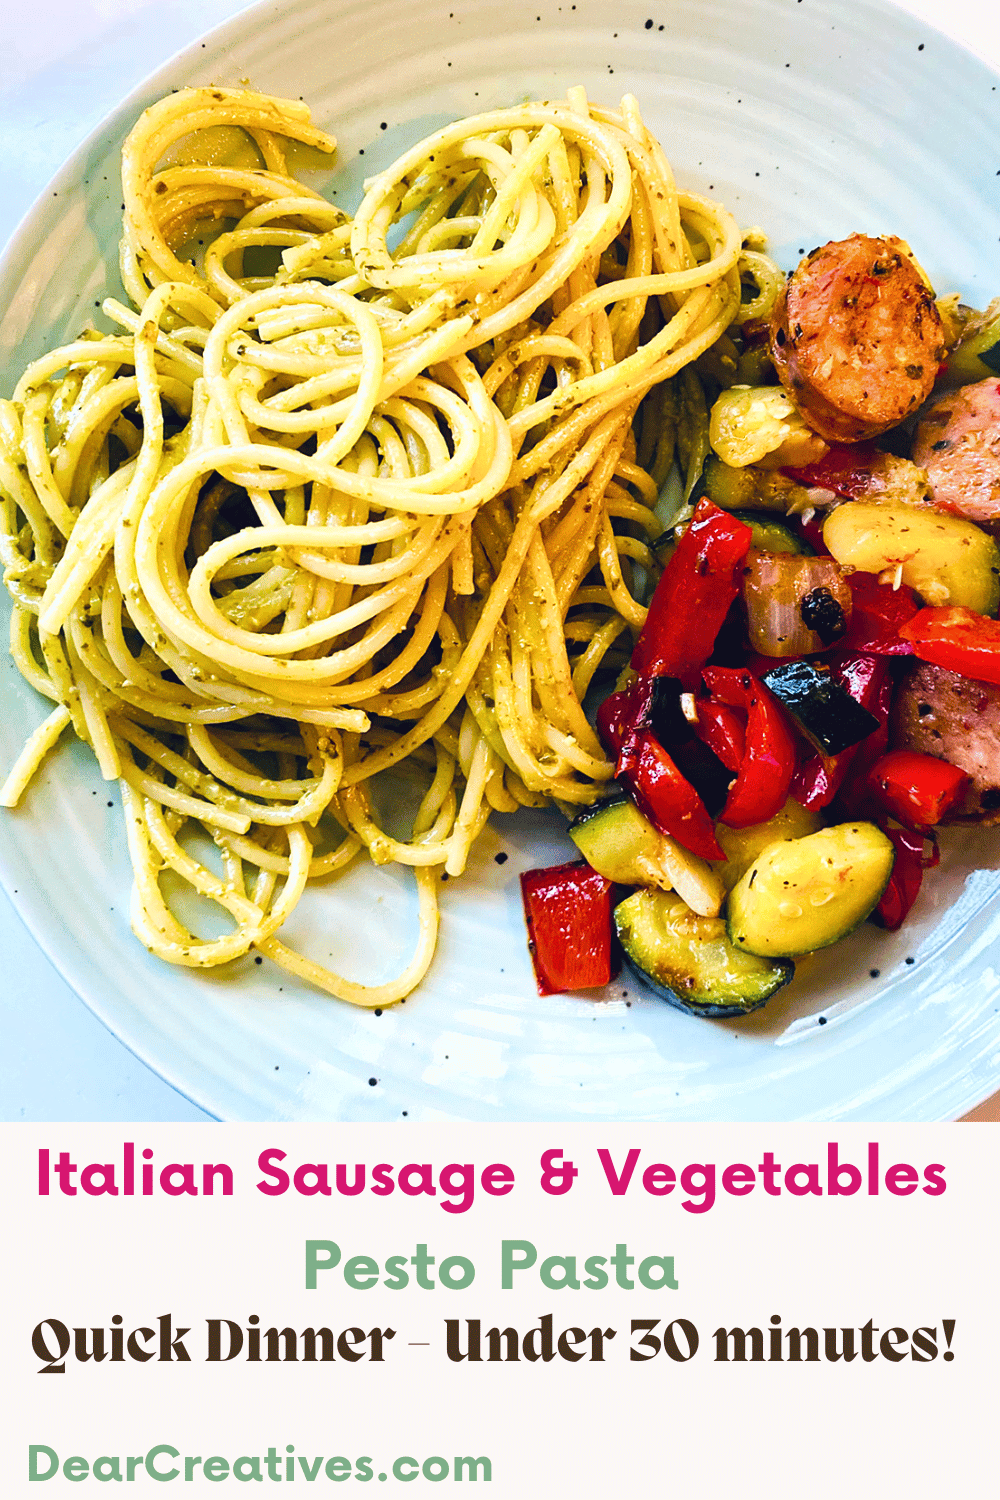 Italian Sausage and Vegetables Recipe - with Pesto Pasta - Meals With Italian Sausage - Recipe at DearCreatives.com